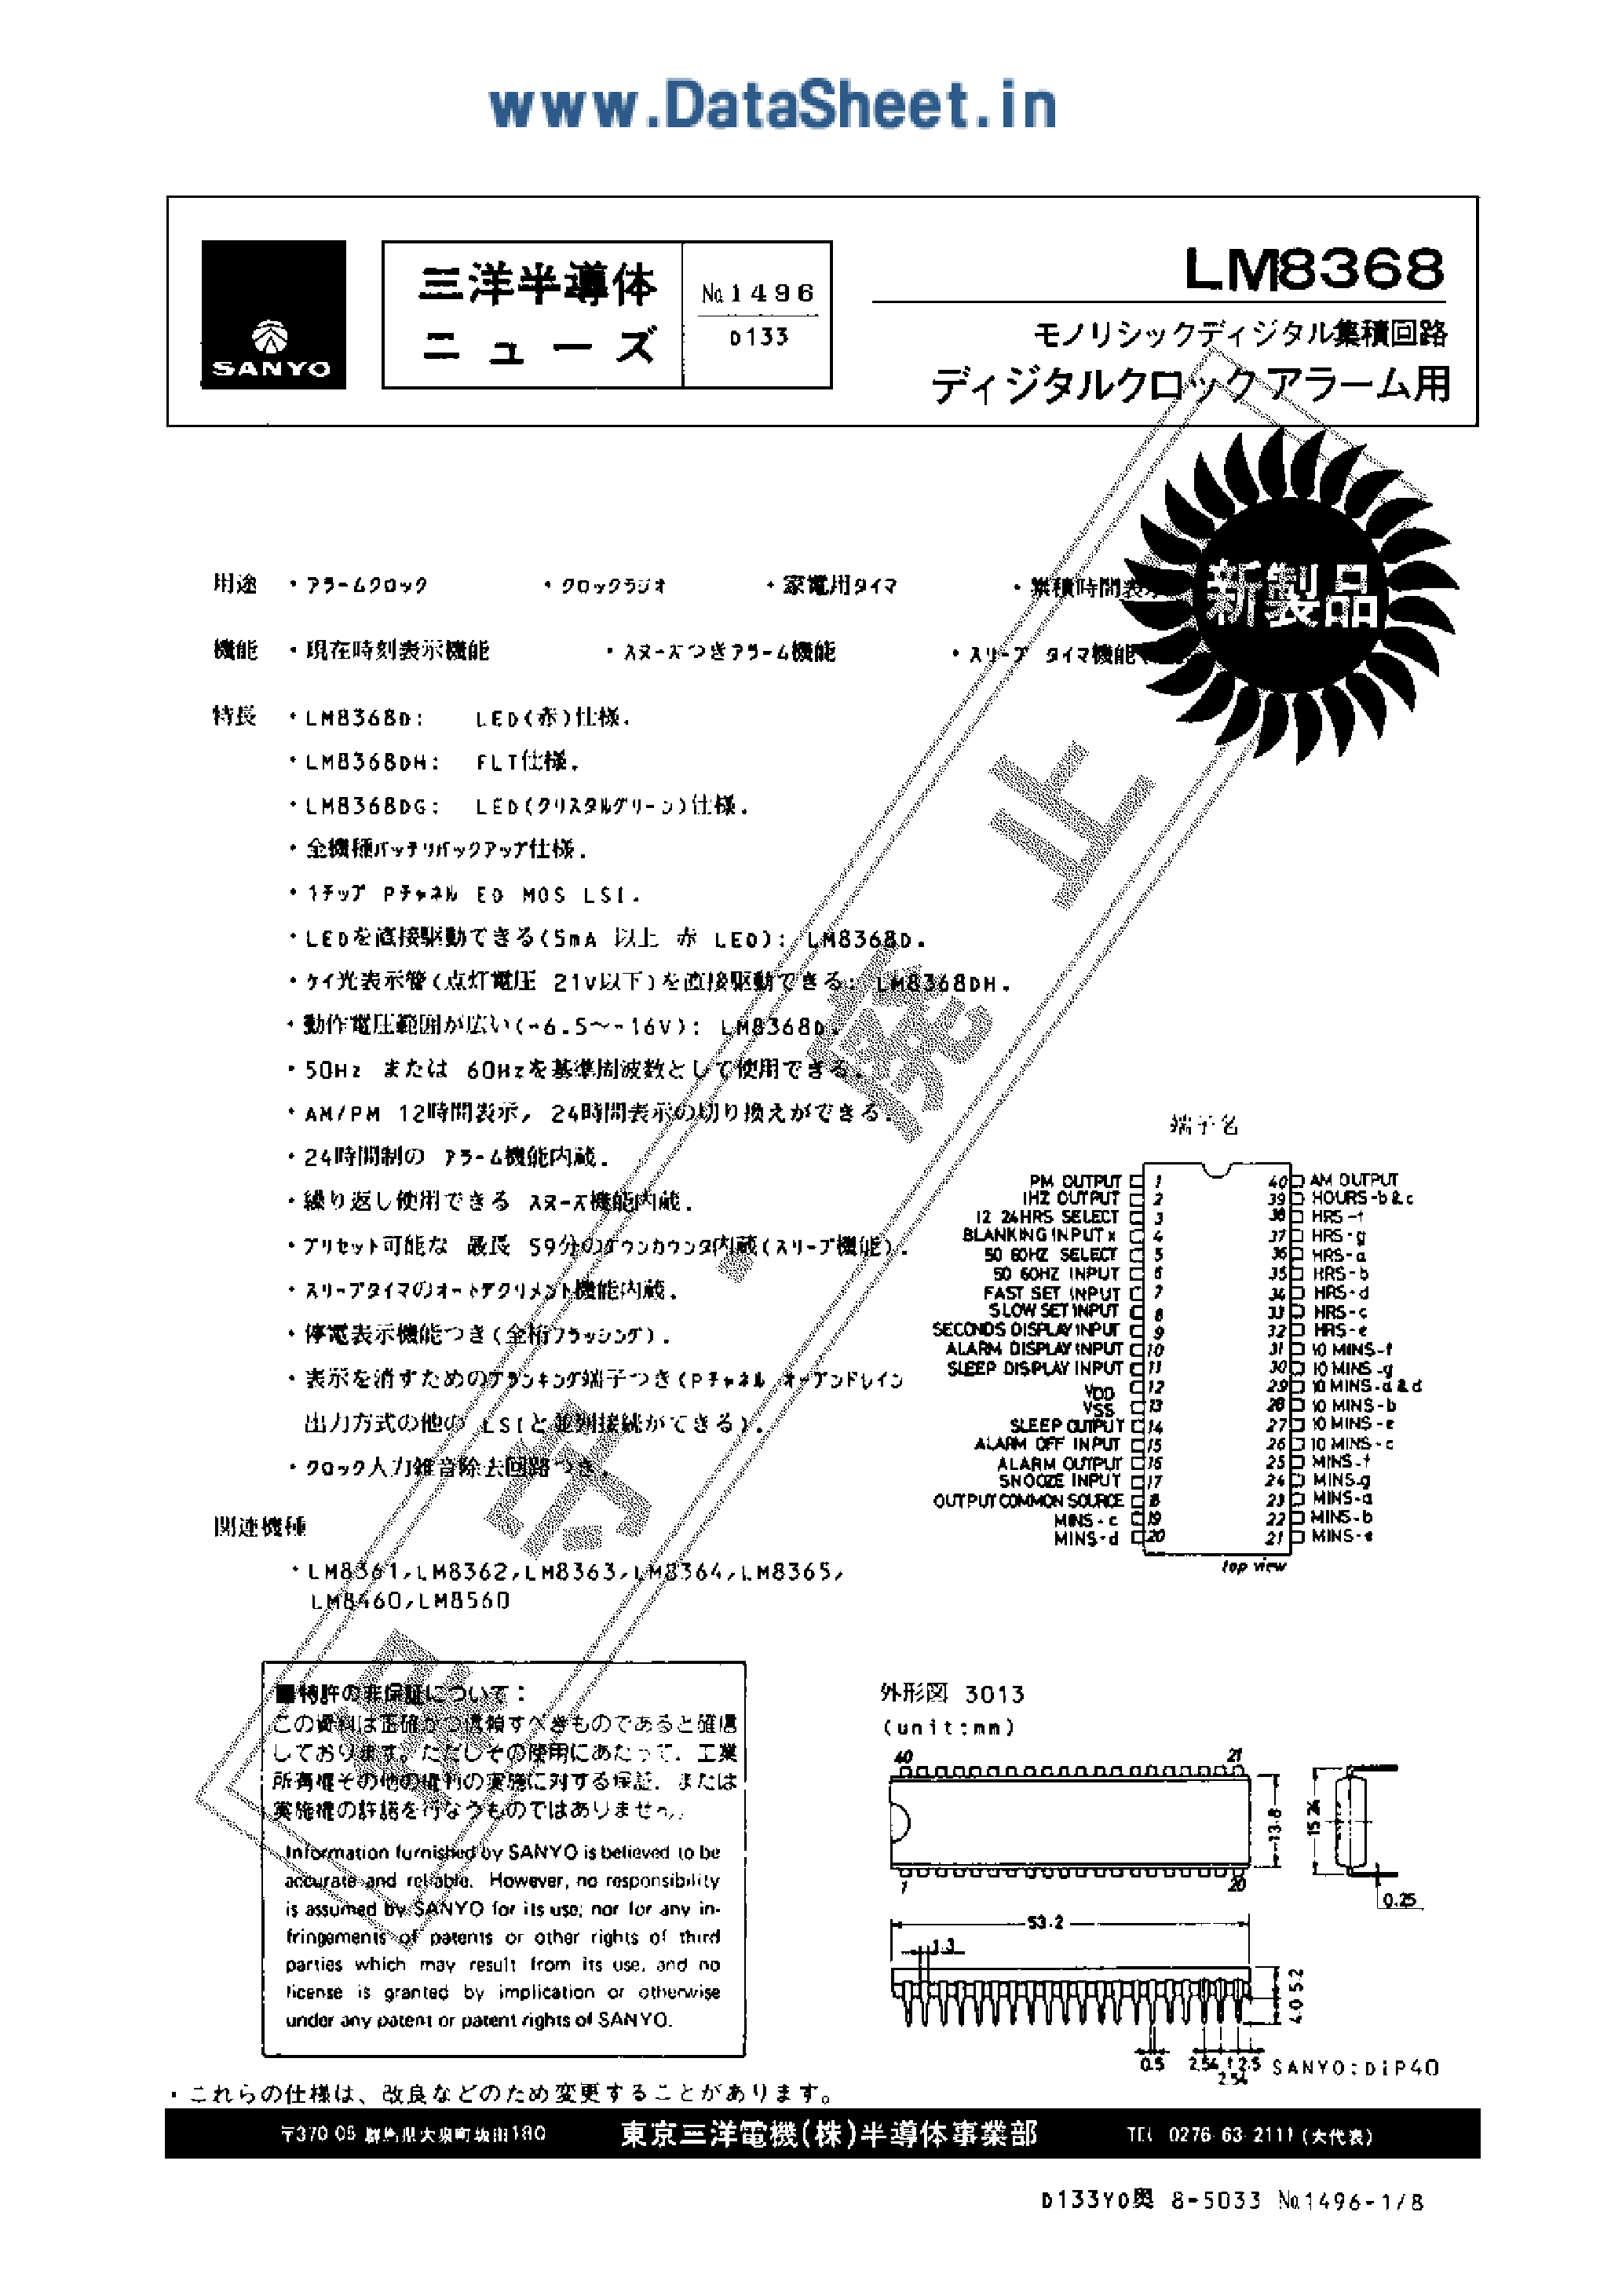 Datasheet LM8368 - LM8368 page 1